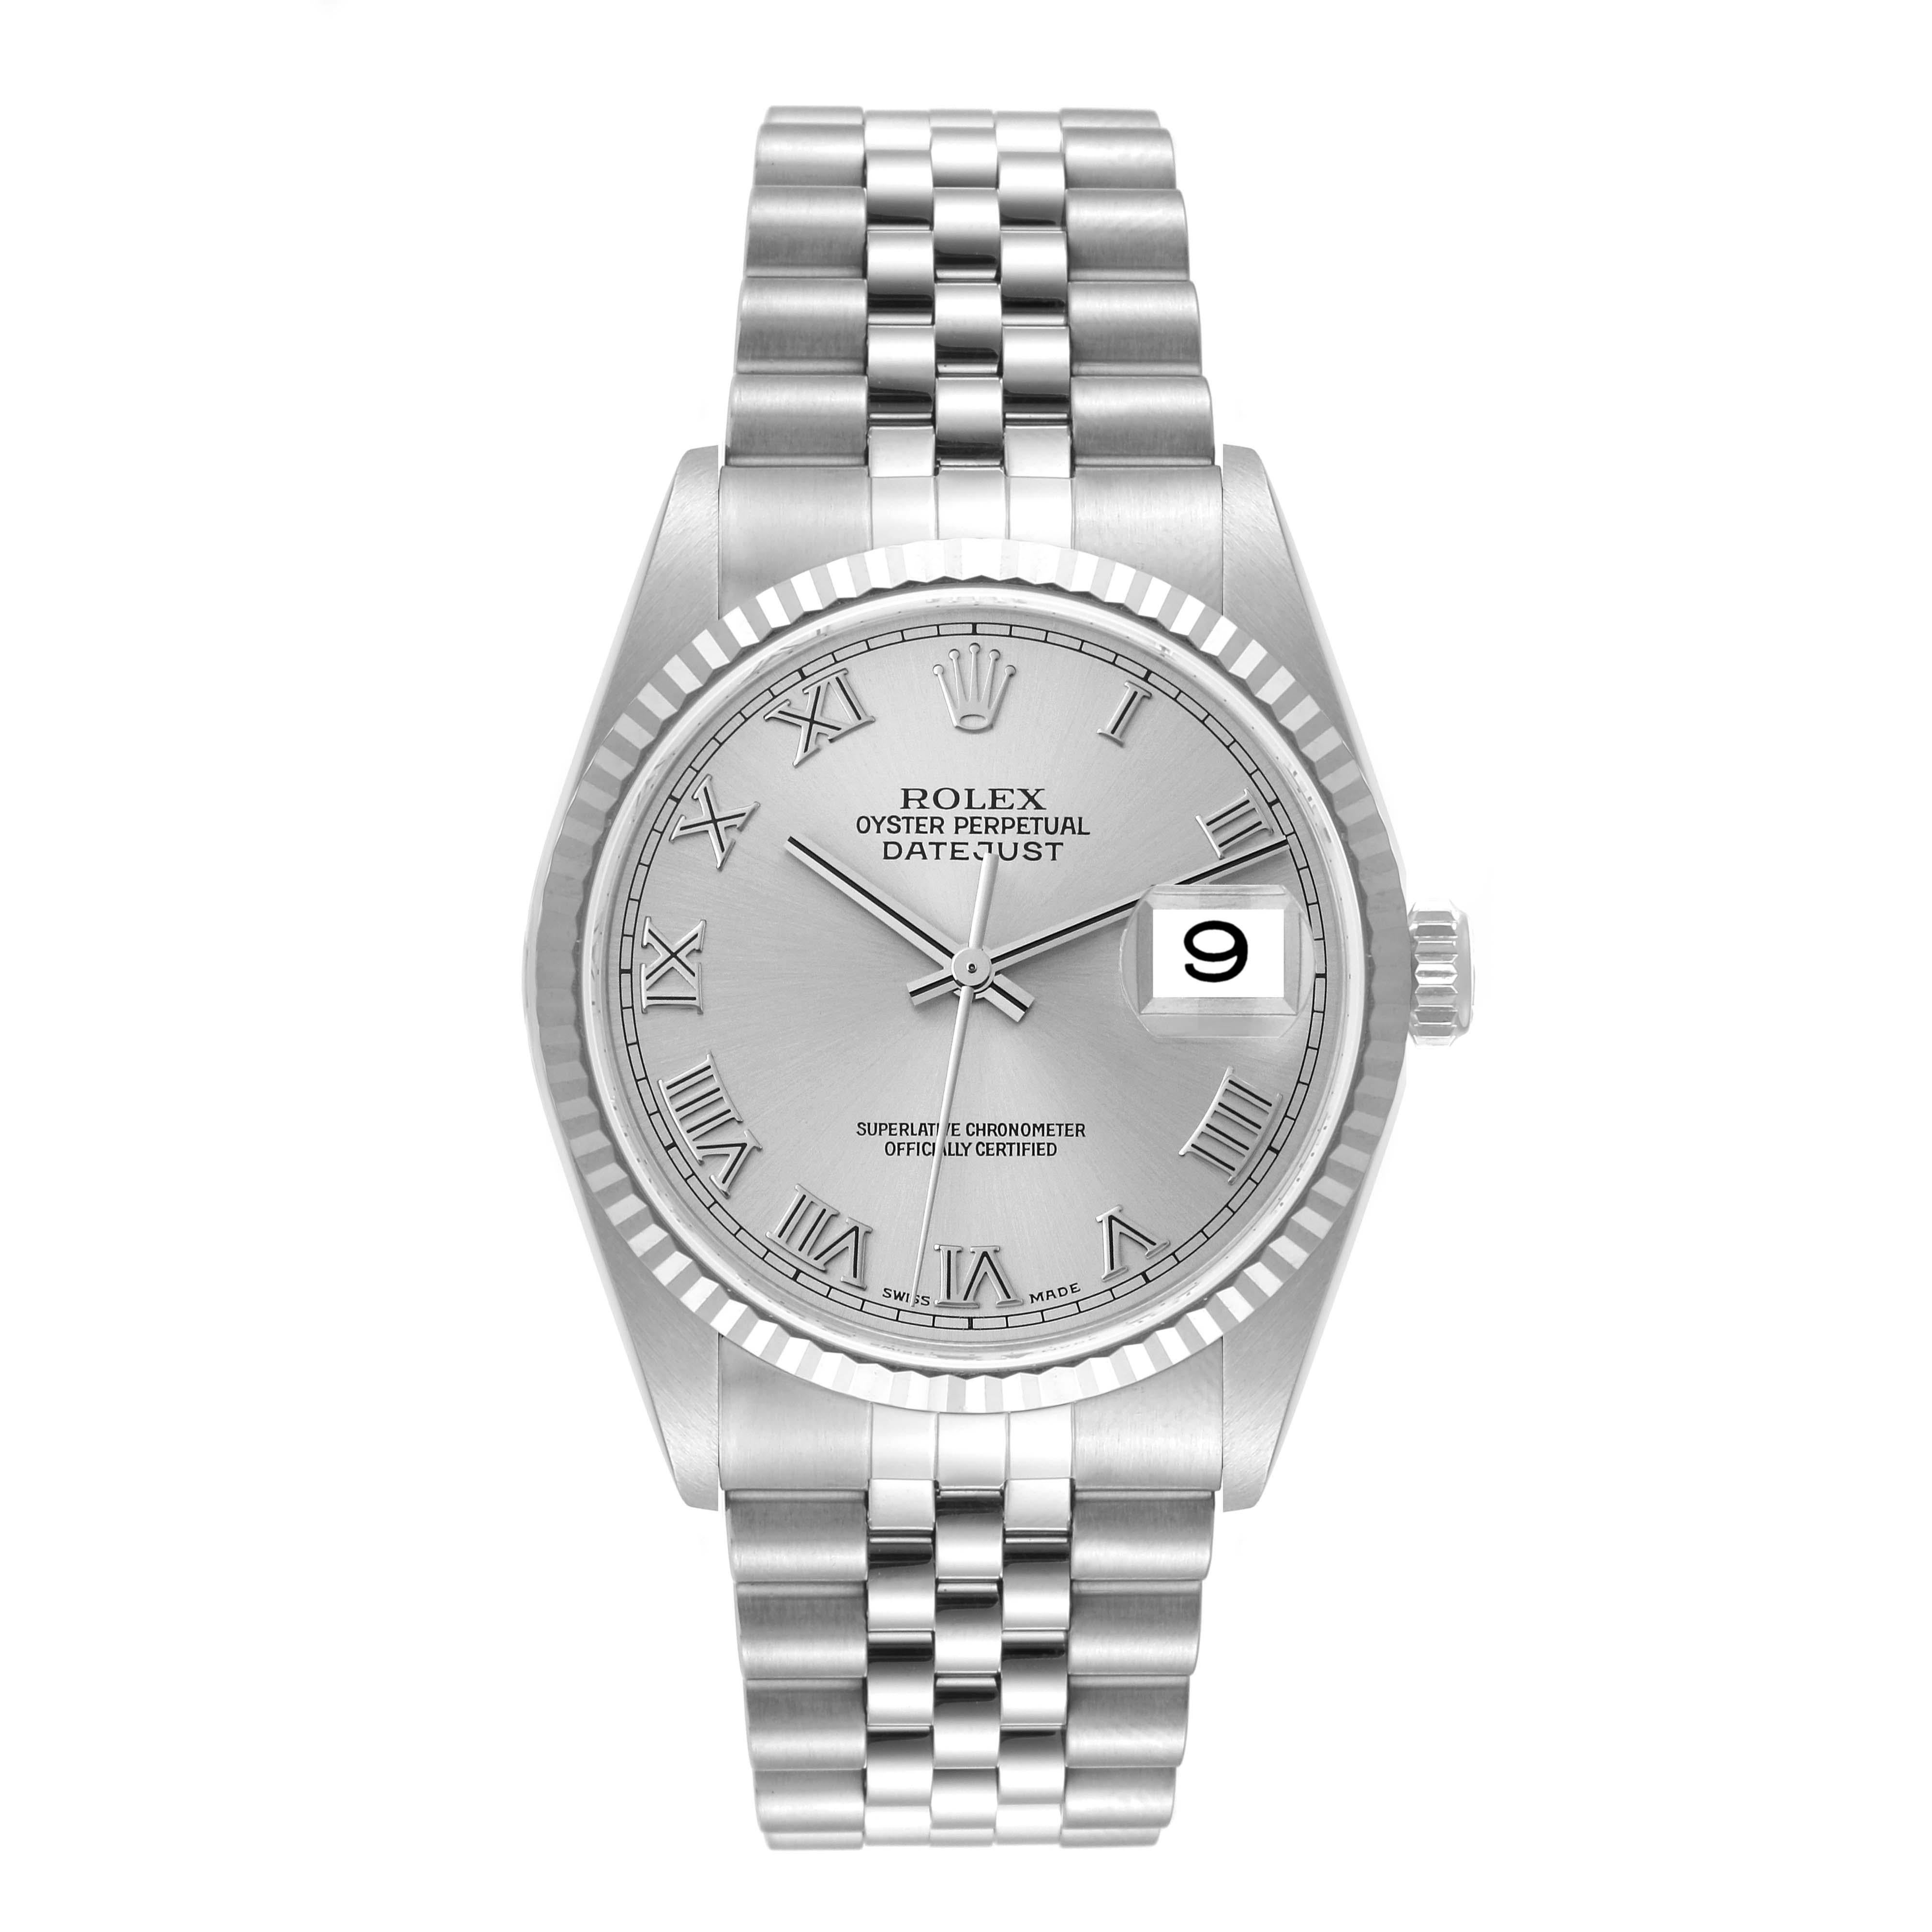 Rolex Datejust Steel White Gold Silver Roman Dial Mens Watch 16234. Officially certified chronometer automatic self-winding movement. Stainless steel oyster case 36 mm in diameter. Rolex logo on the crown. 18k white gold fluted bezel. Scratch